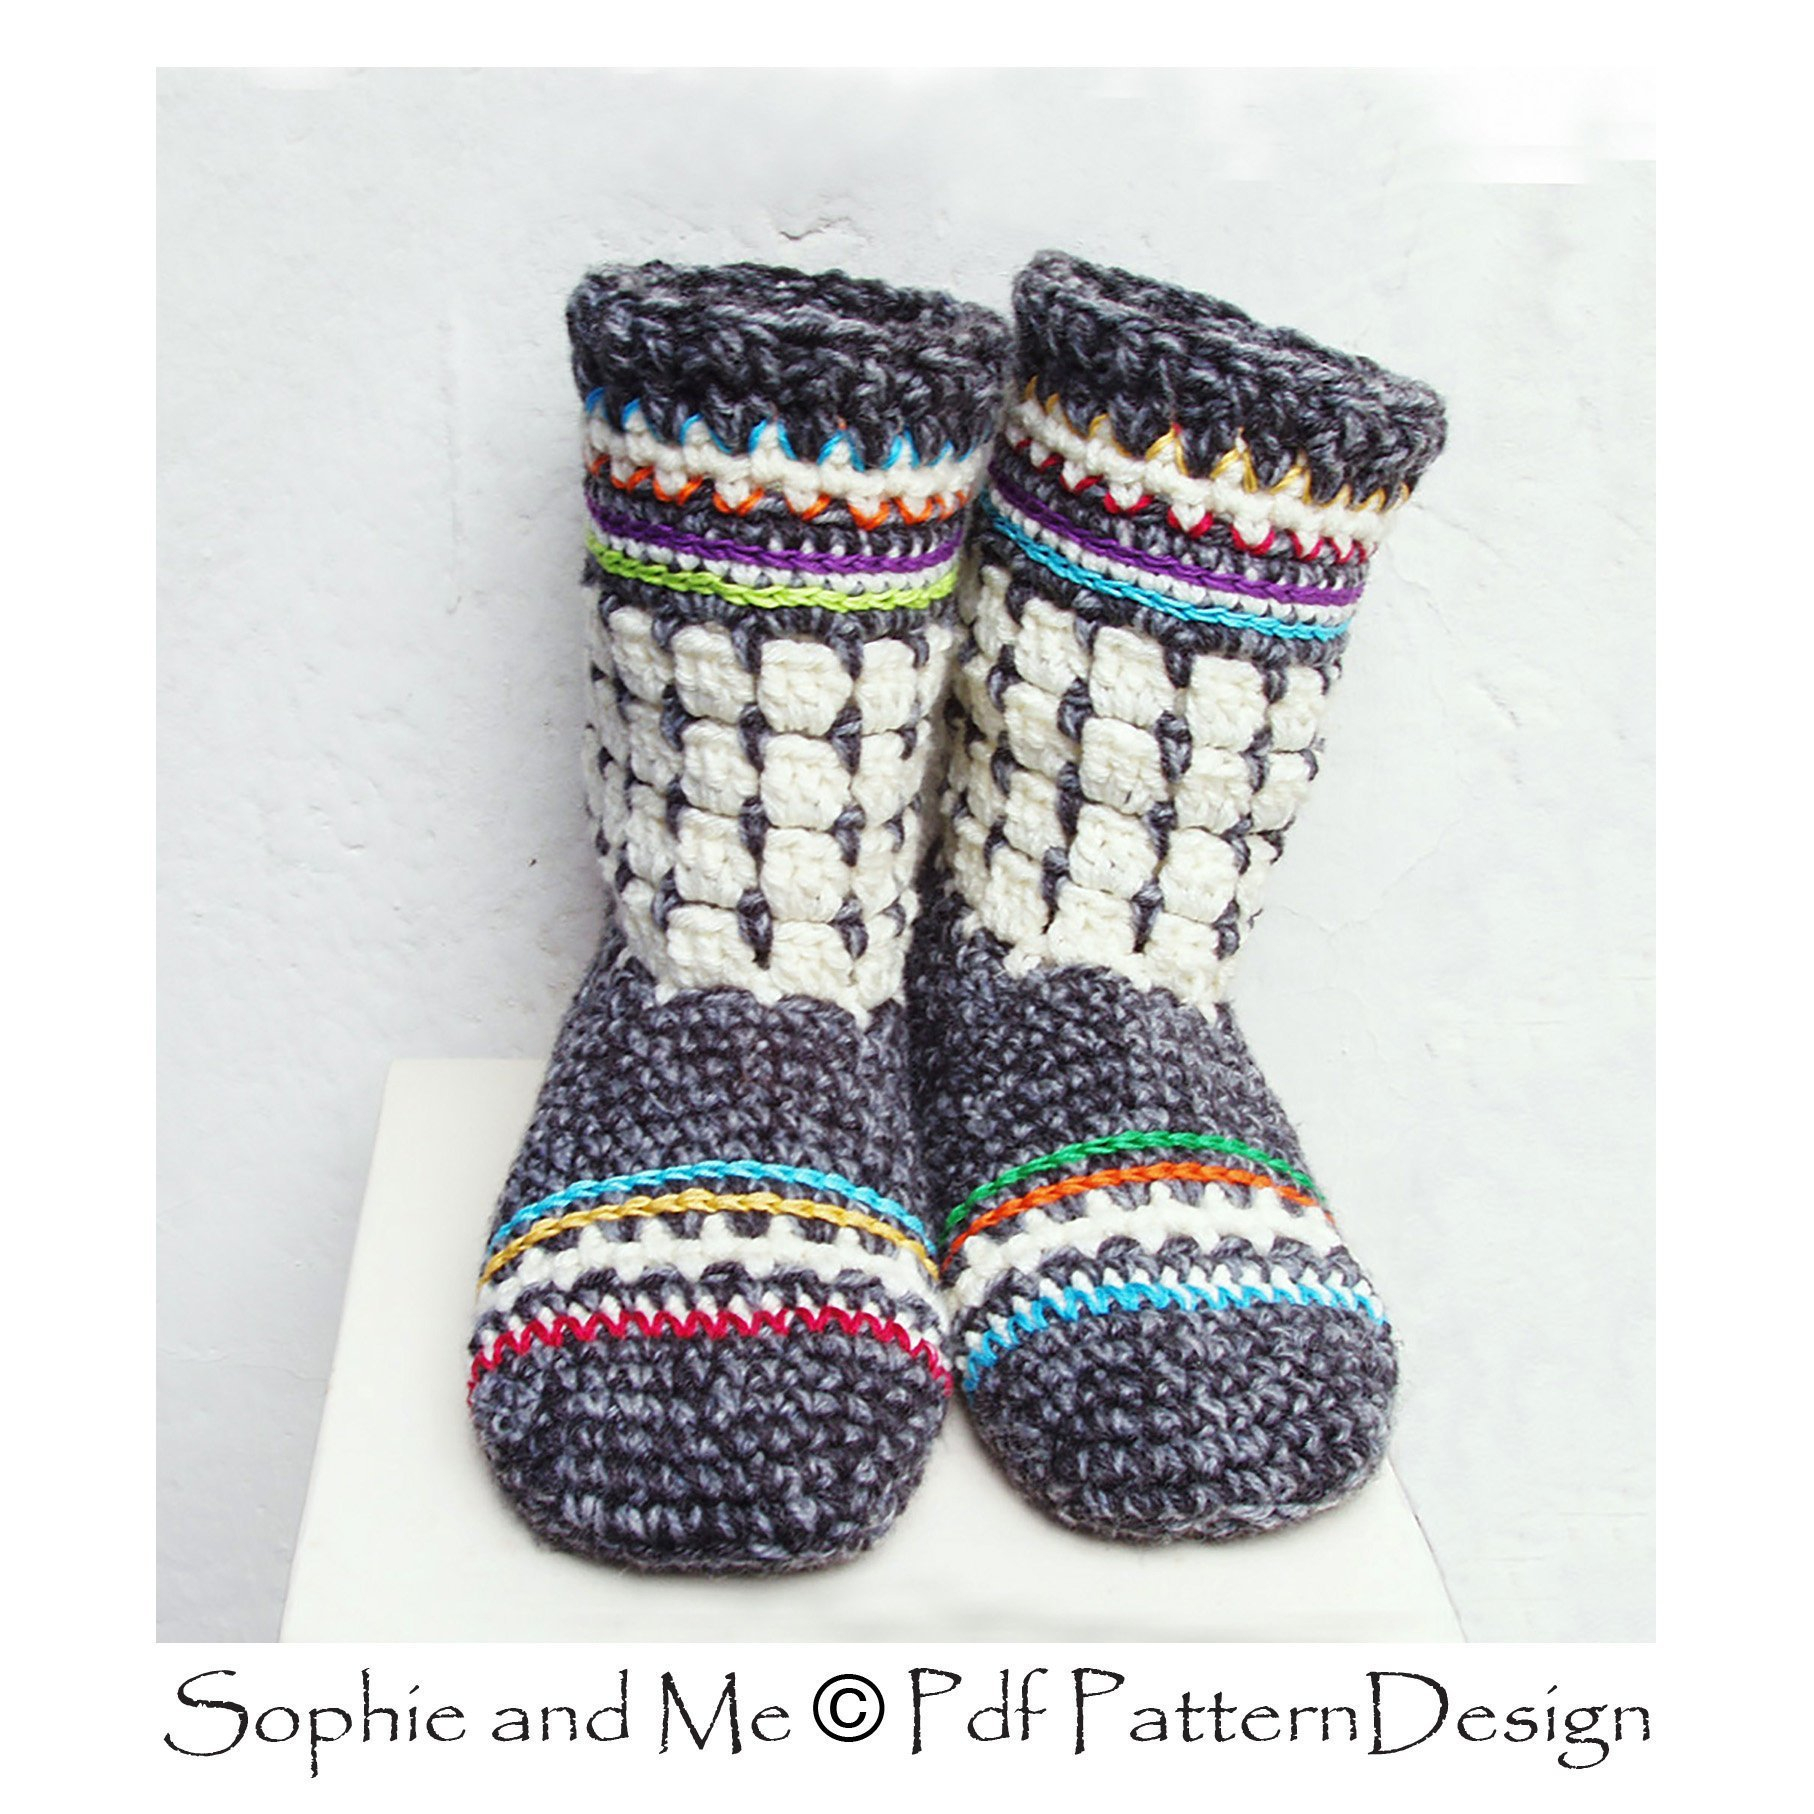 Crochet Boots Pattern For Adults Fair Isle Oslo Boots For Adults Crochet Slipper Pdf Pattern Etsy